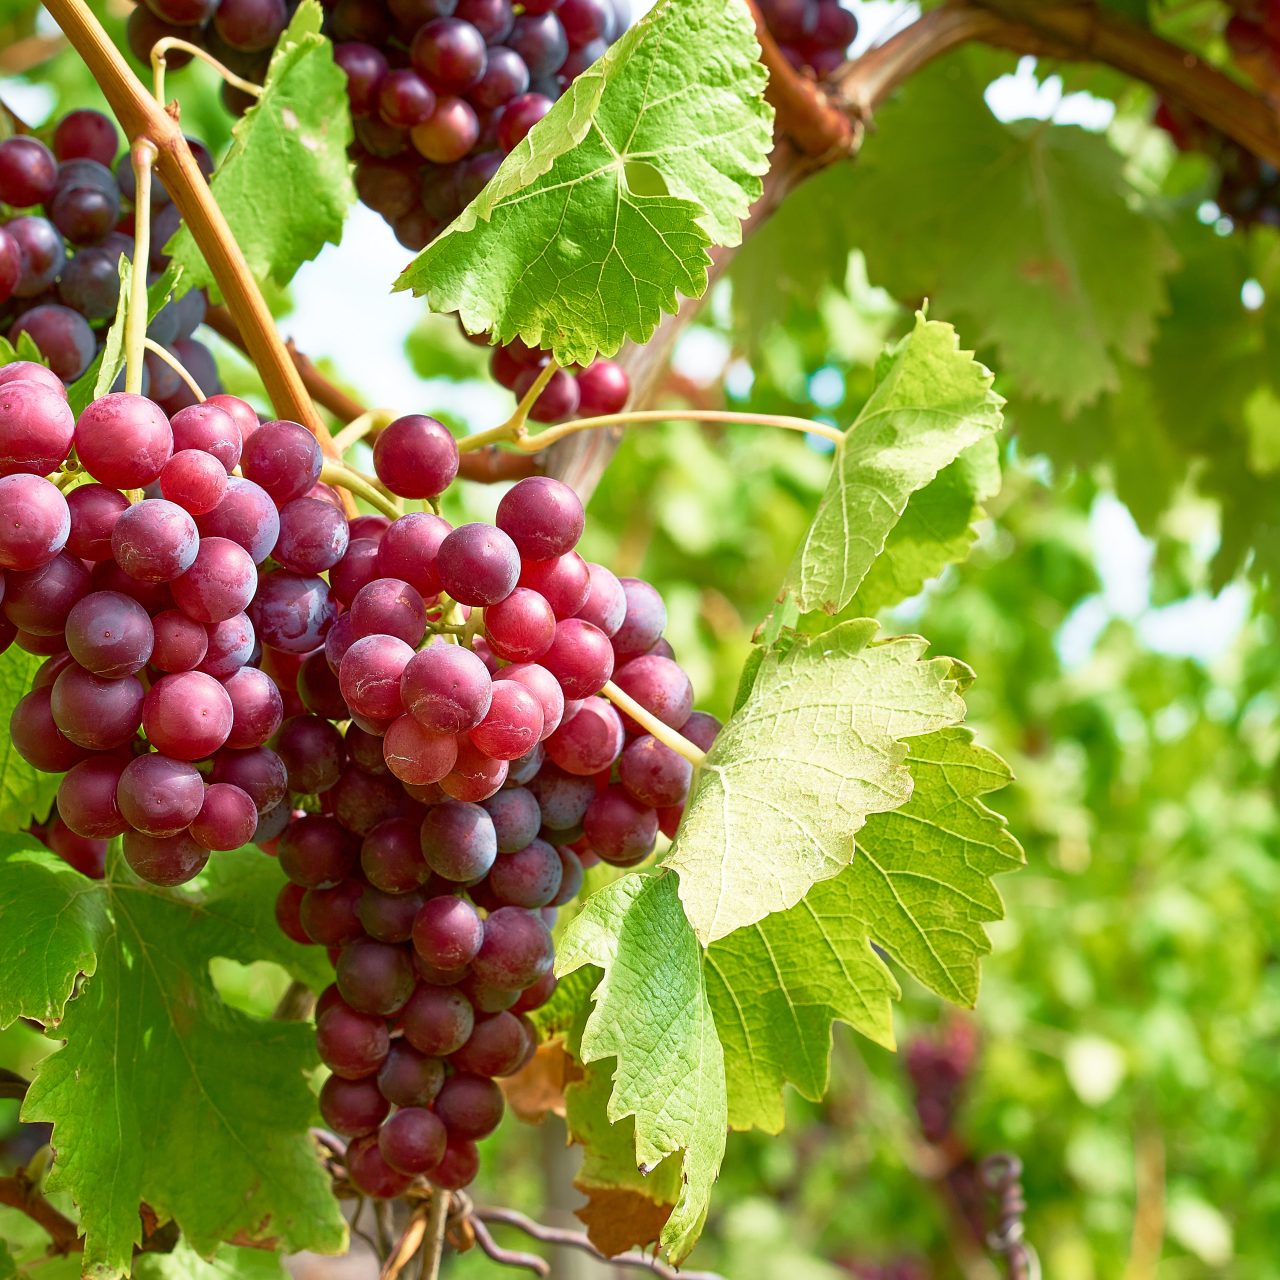 Bunch,Of,Grapes,On,A,Vine,In,The,Sunshine,/